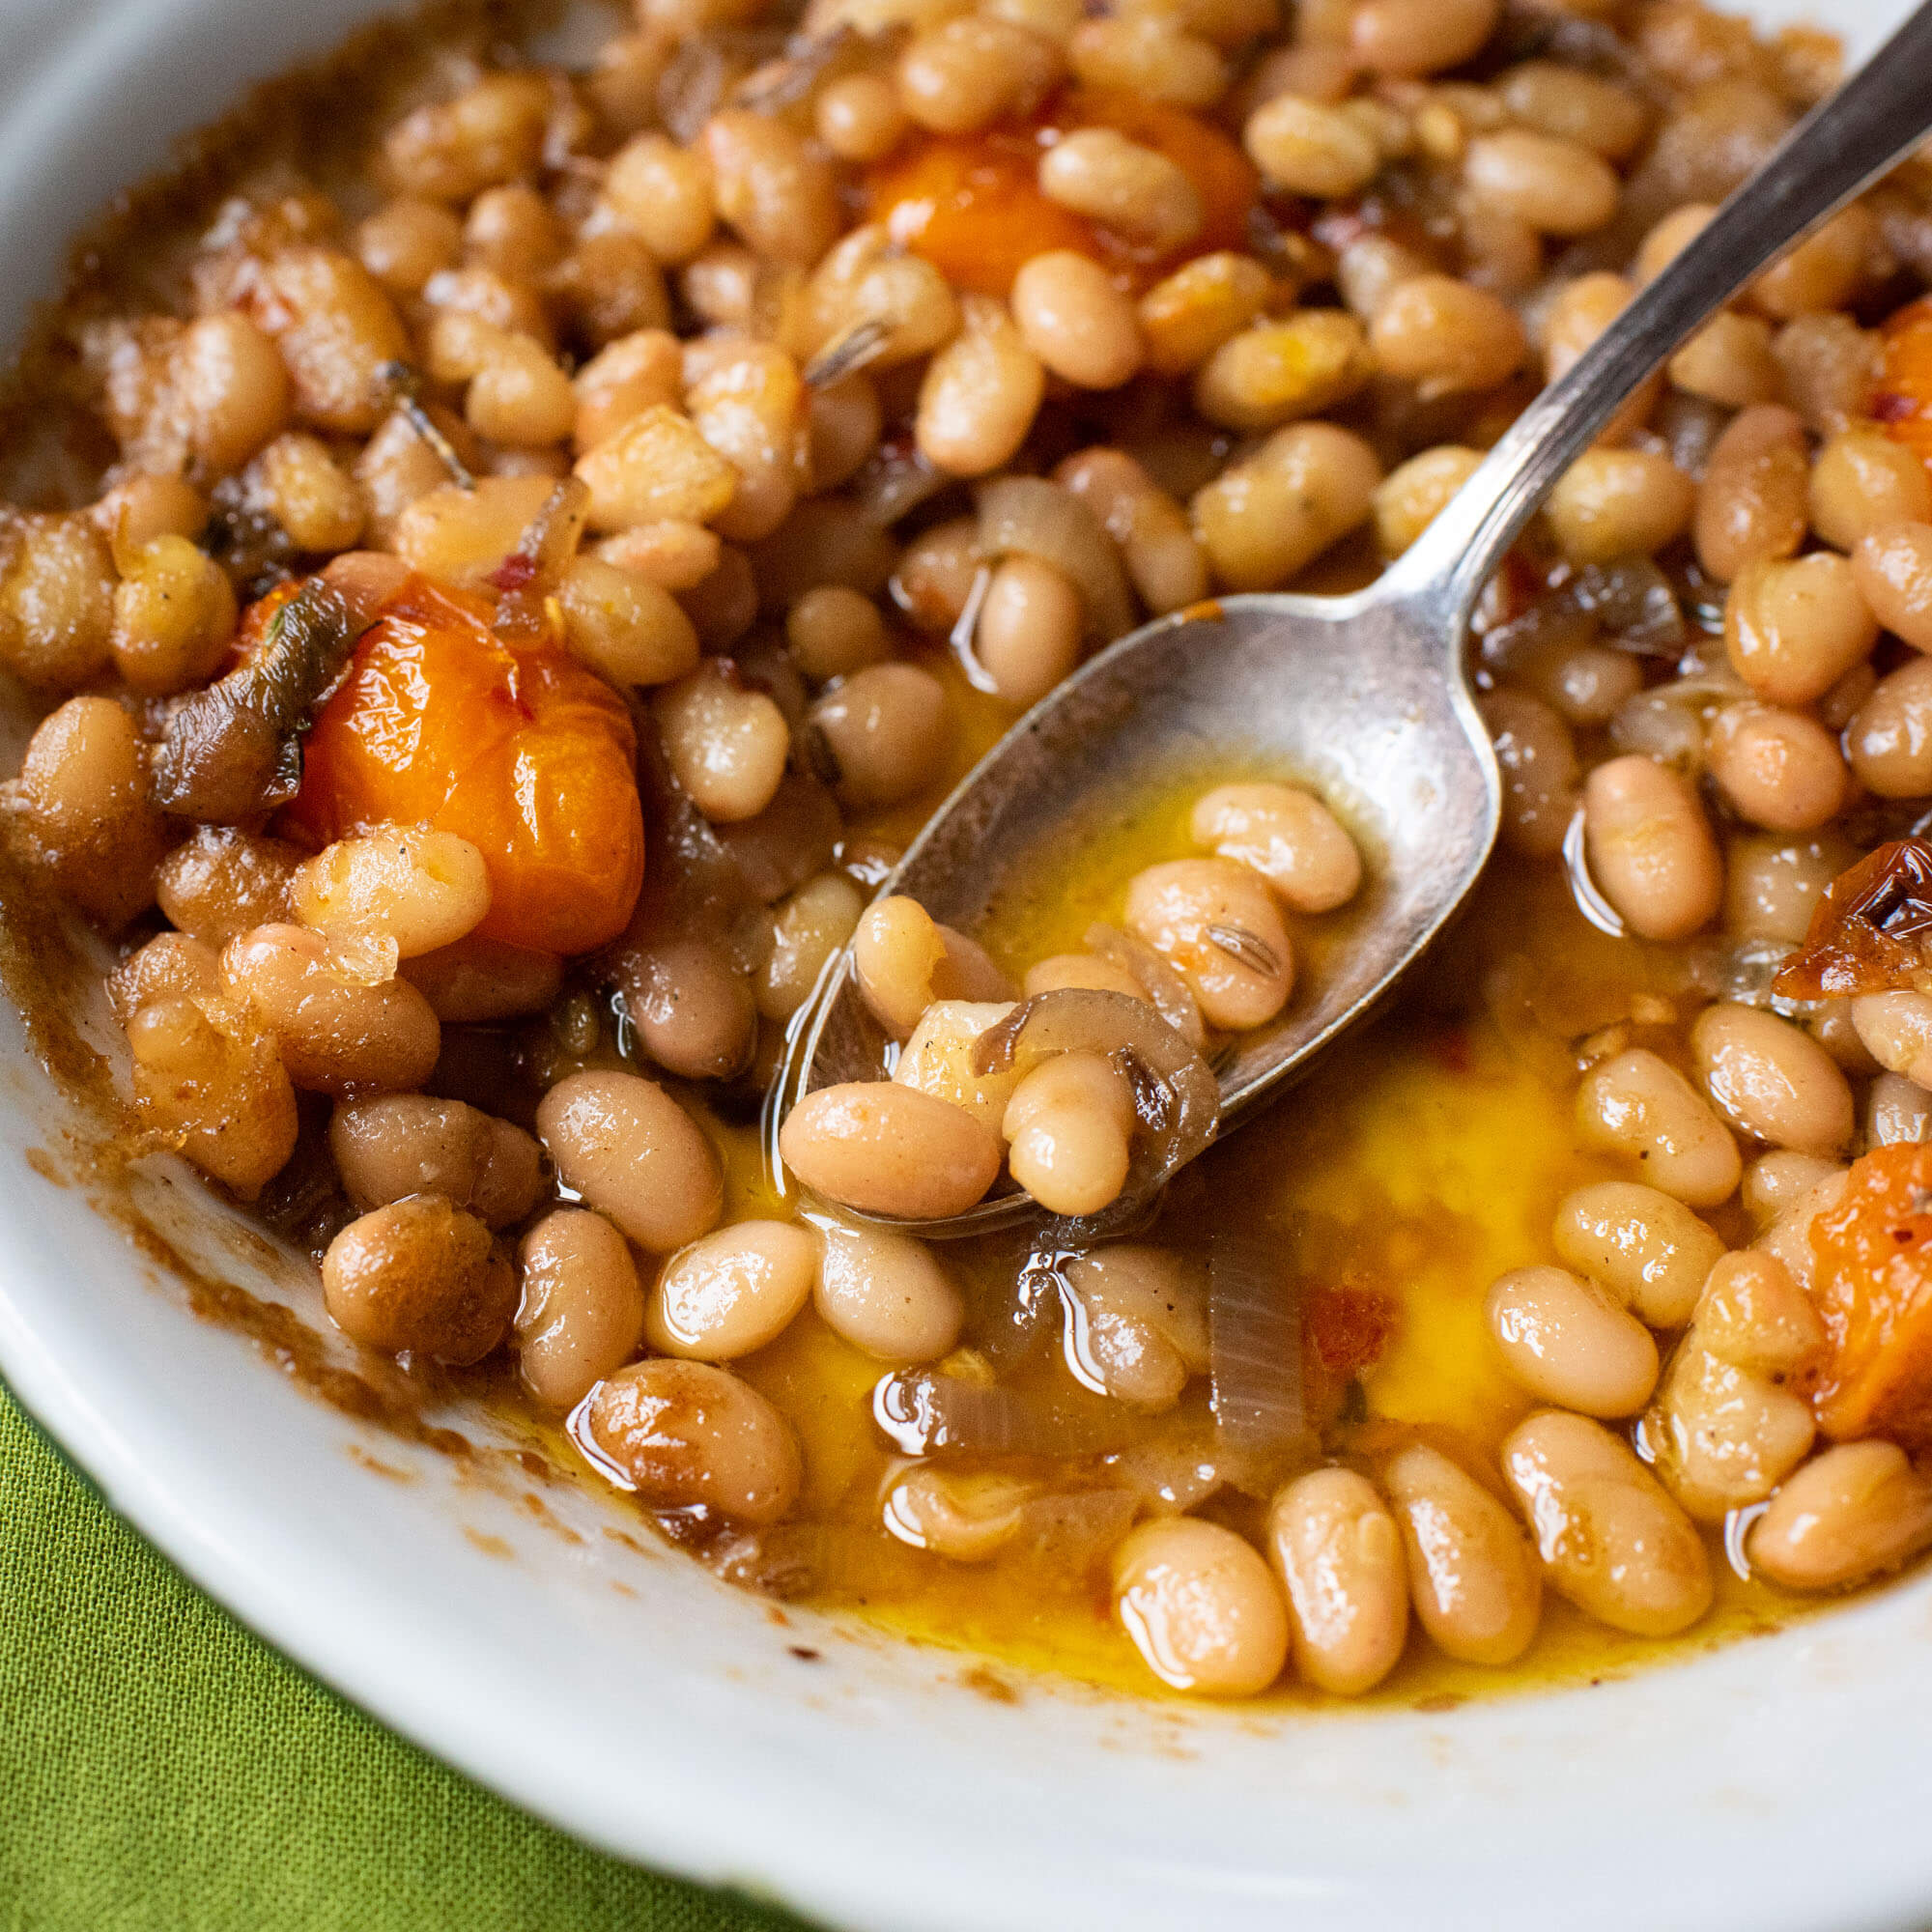 Baked Alubia beans with Primary Beans